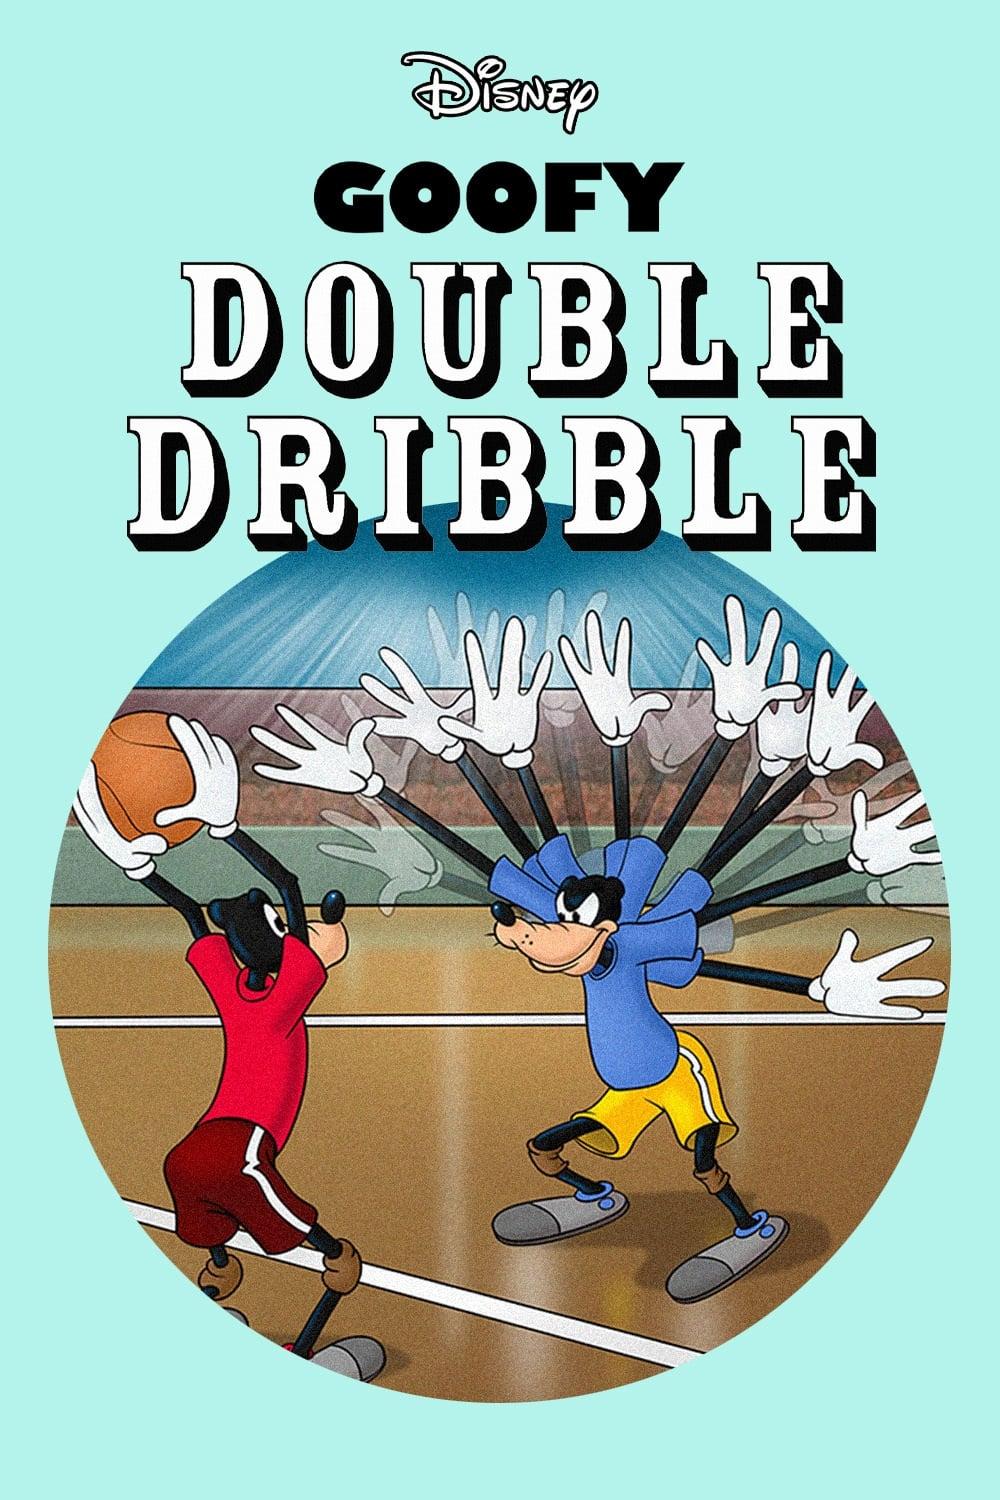 Double Dribble poster